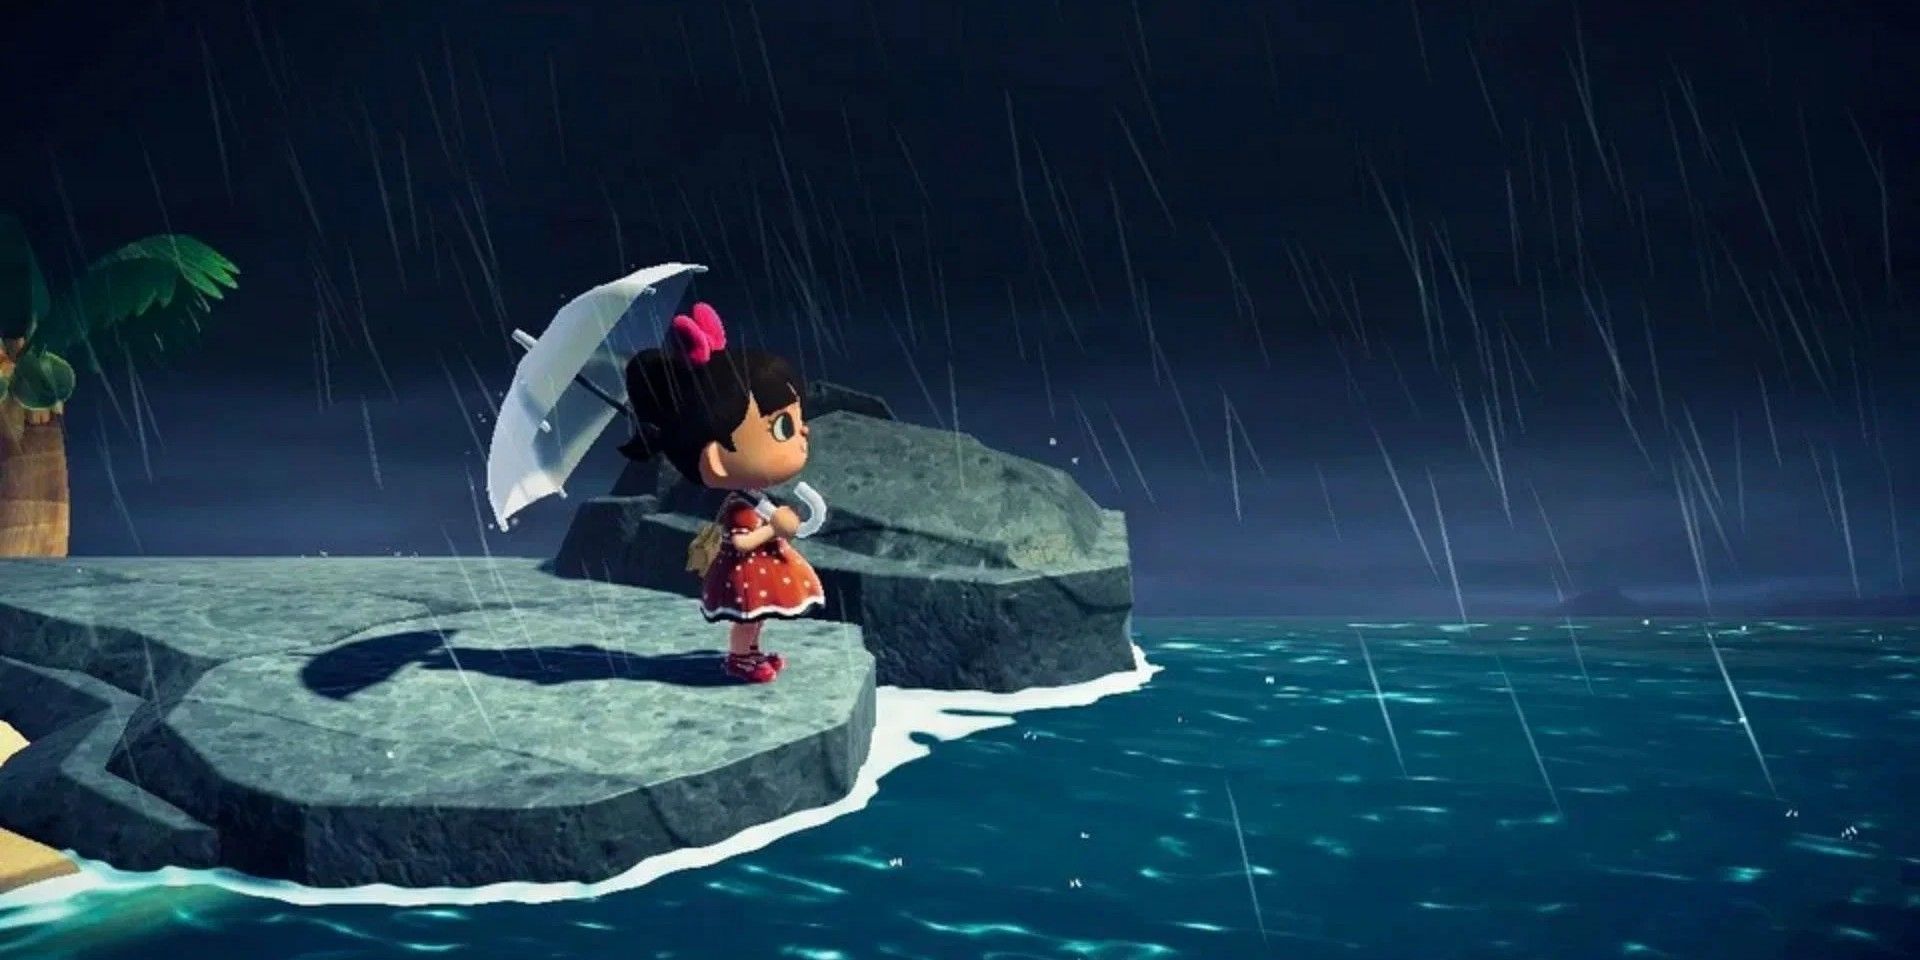 animal crossing new horizons villager in the rain by the sea in a thunderstorm